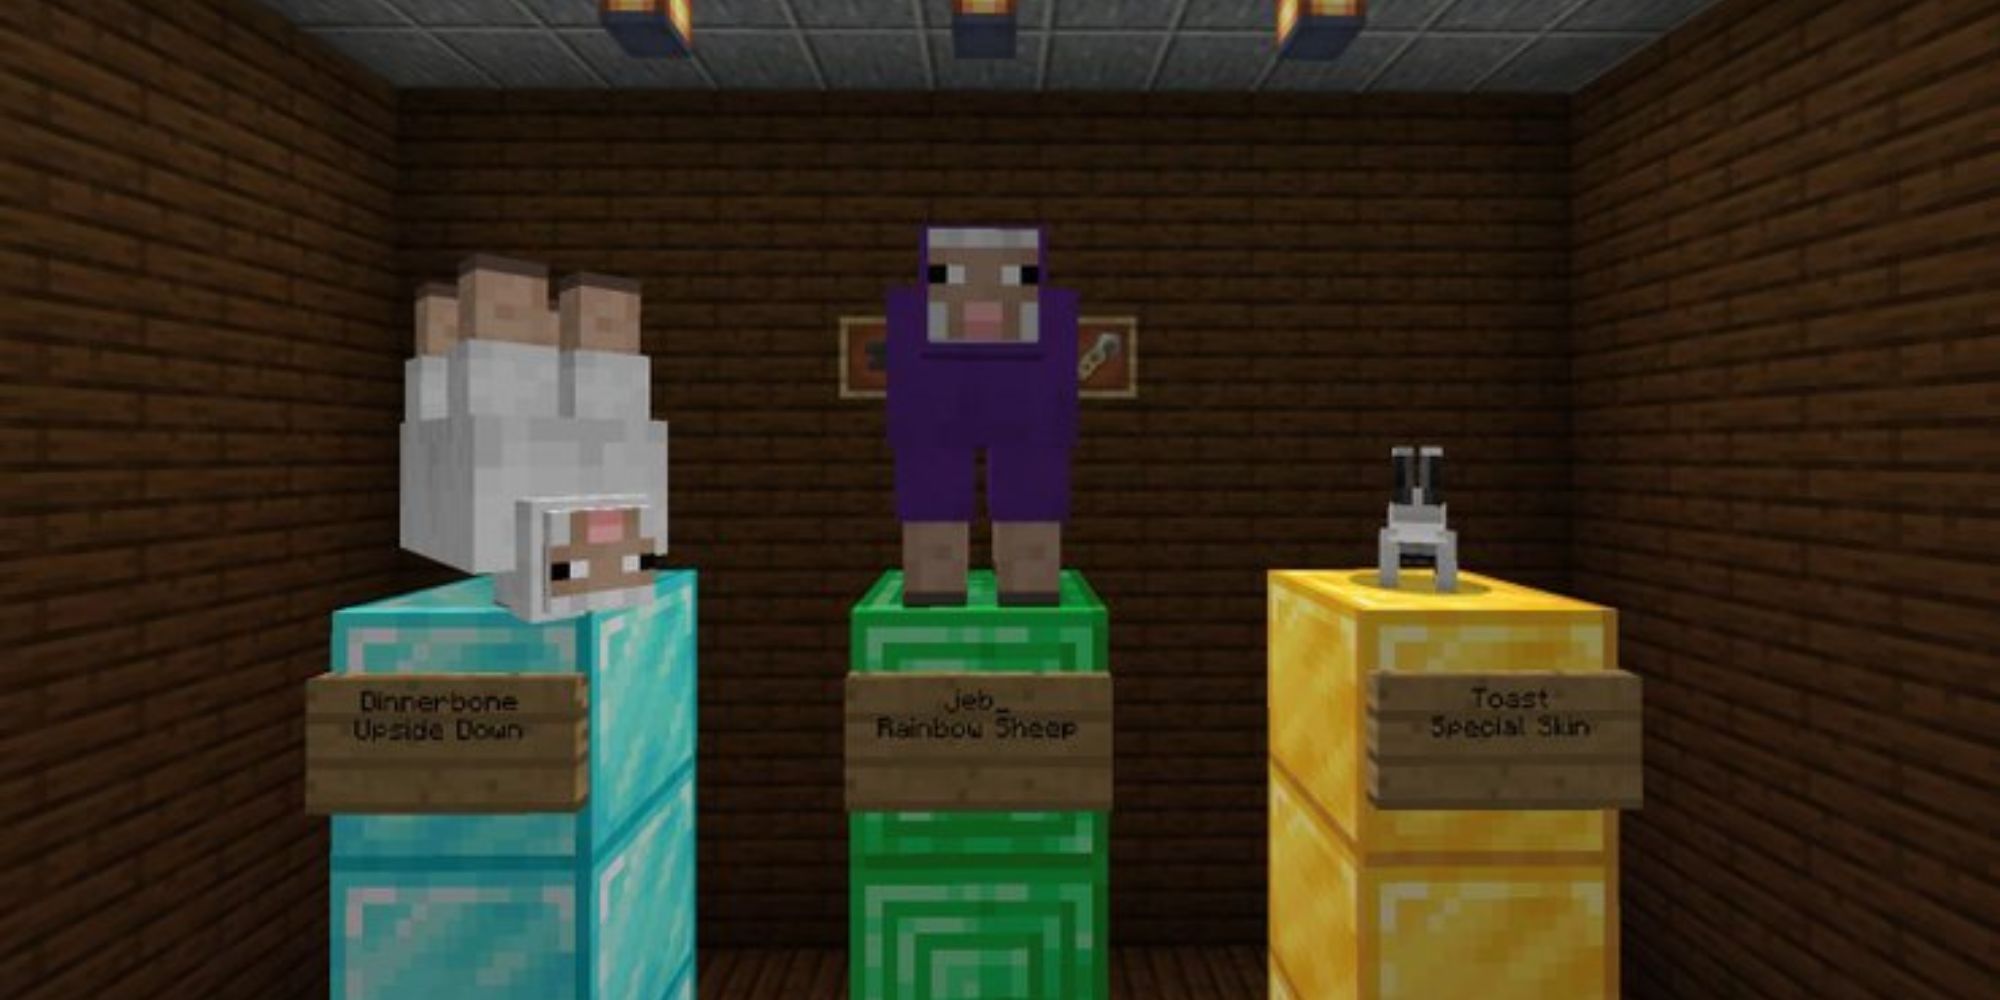 aud-vel-ent-o-v-rtice-name-tag-minecraft-villager-sujo-gal-o-independ-ncia